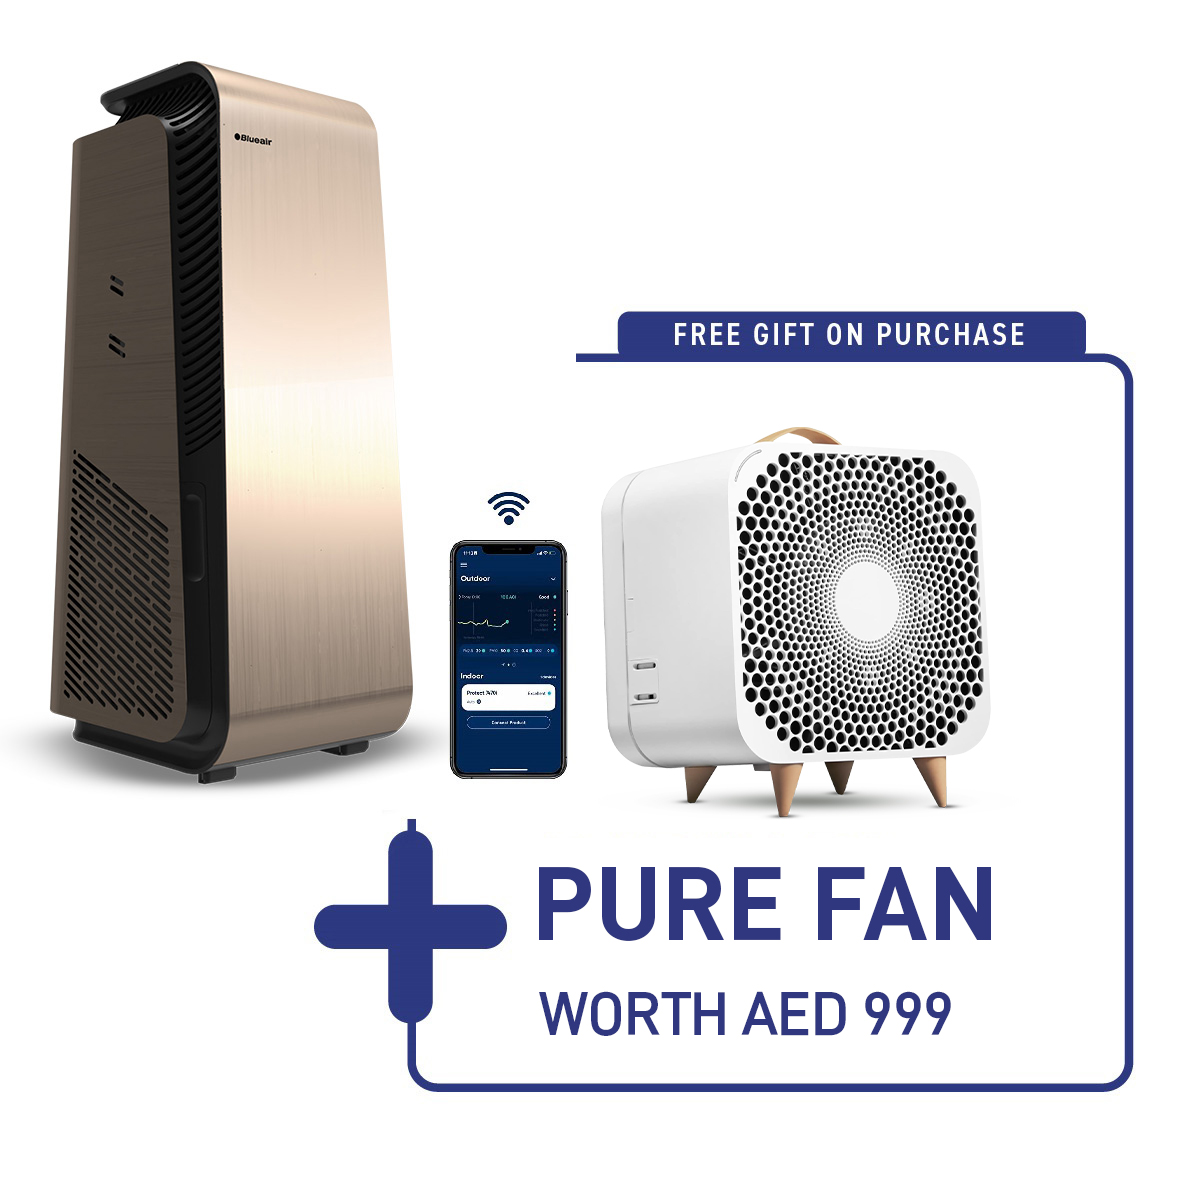 Picture of Blueair HealthProtect 7775i - Air Purifier | Up to 62 sqm| Limited Edition